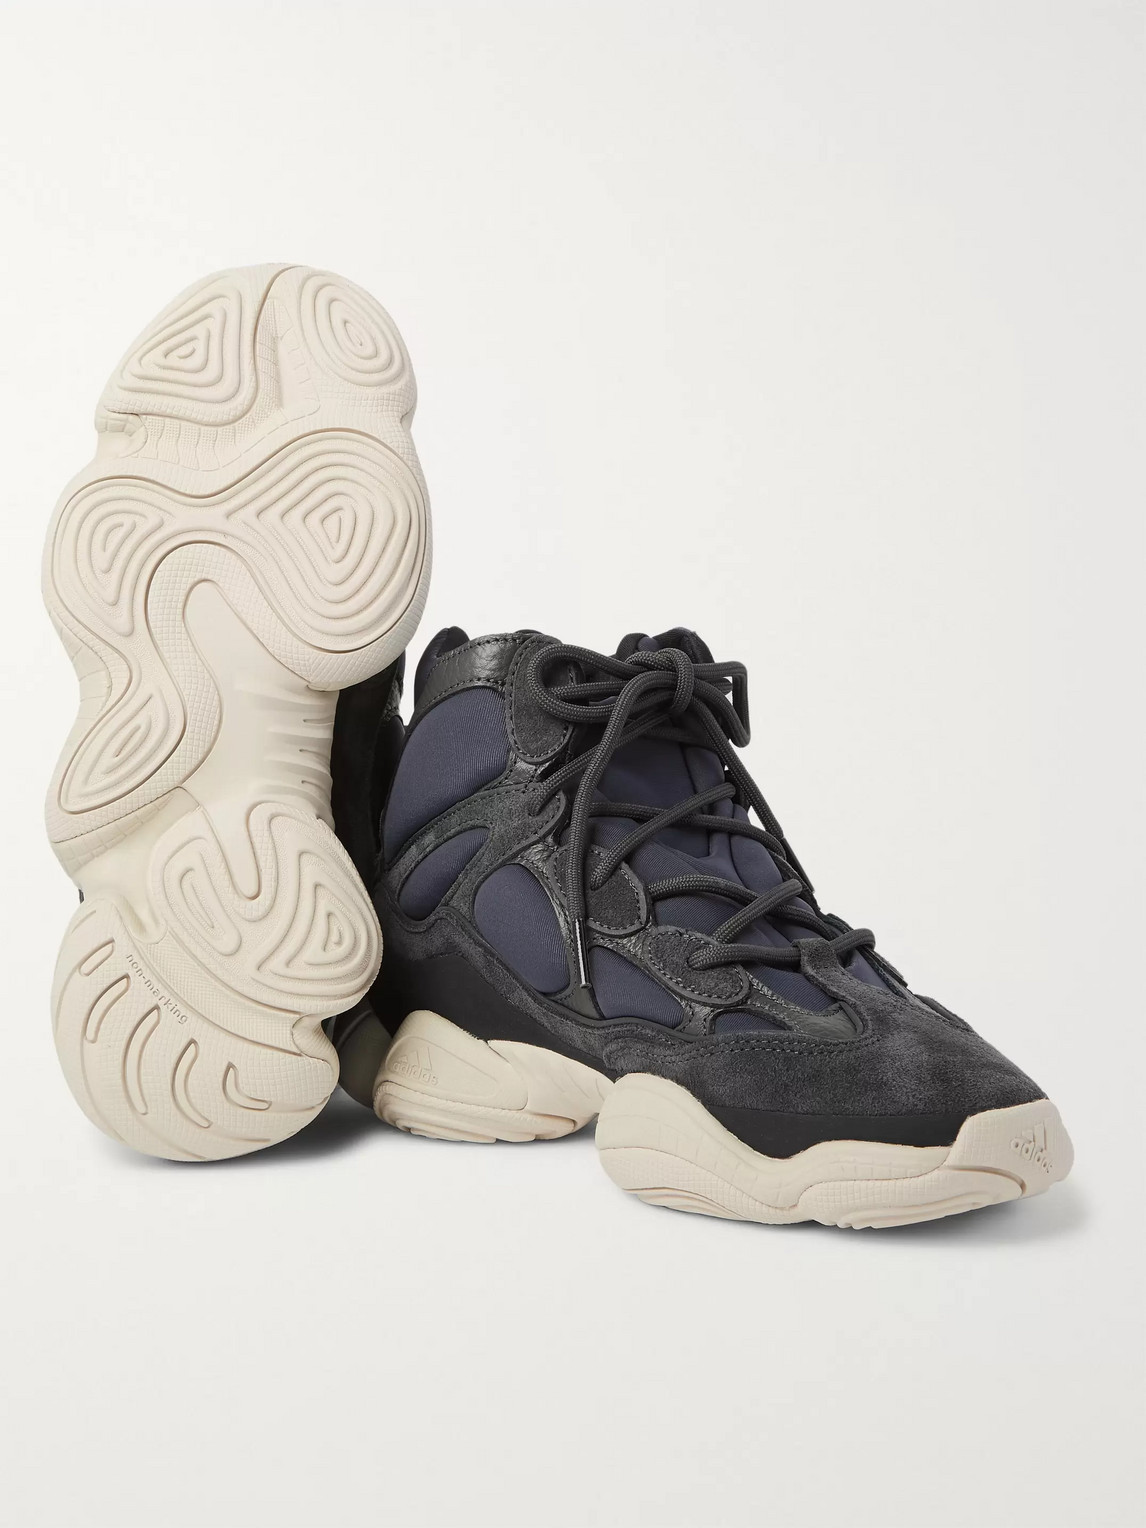 ADIDAS ORIGINALS YEEZY HIGH 500 NEOPRENE, SUEDE AND LEATHER HIGH-TOP SNEAKERS